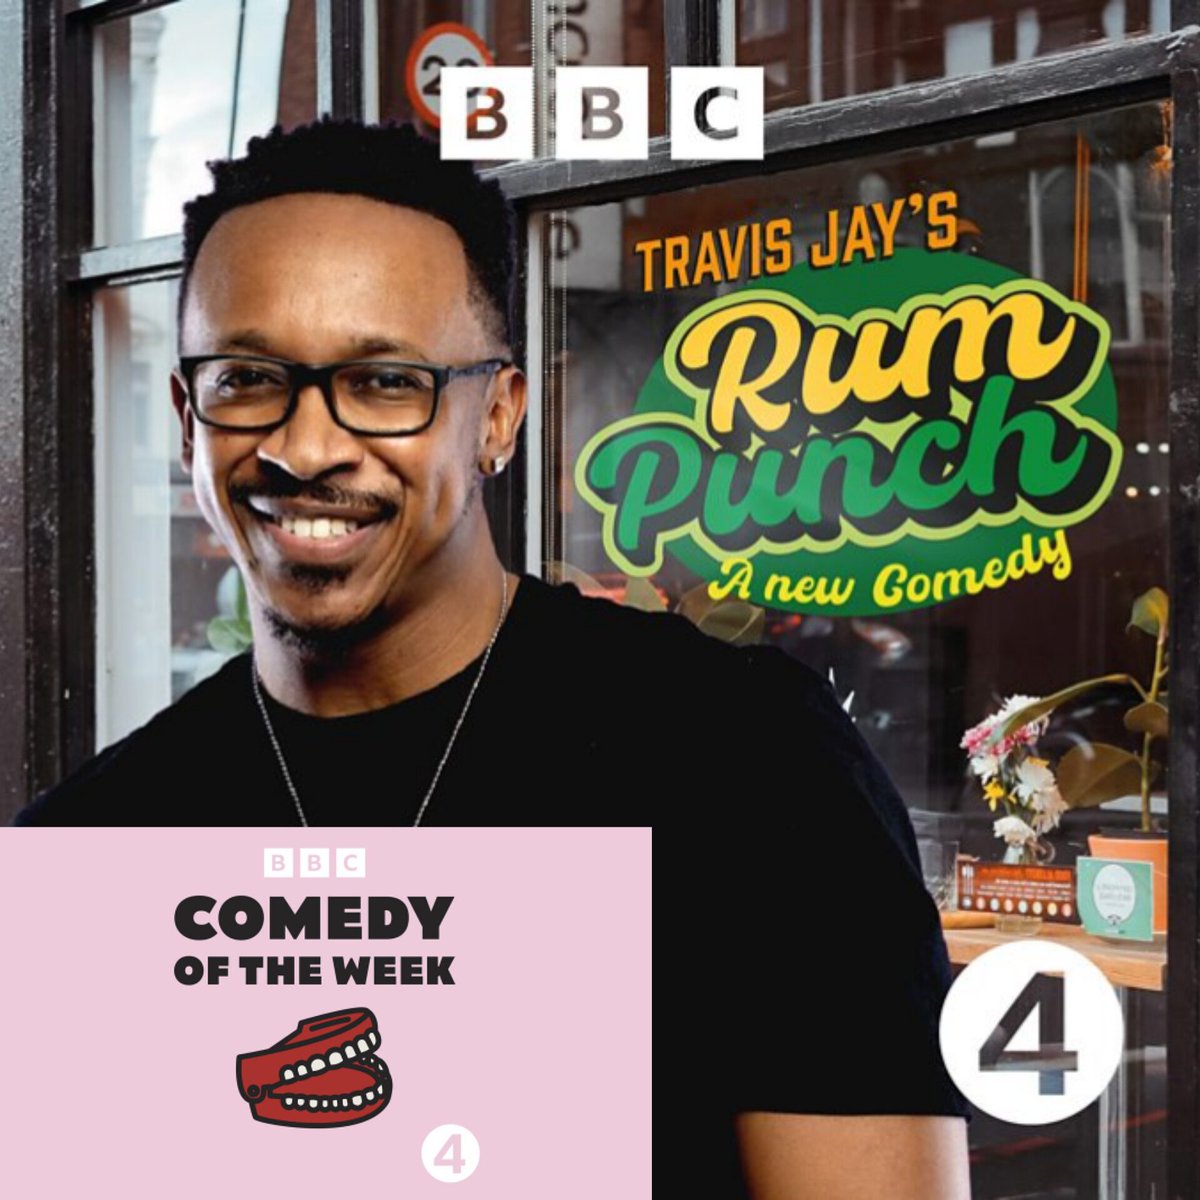 💥COMEDY OF THE WEEK💥 I just found out that #RumPunch🍹 is this weeks BBC Comedy of the week! I can't lie I'm gassed lol... check it out if you haven't already and you can now search for it on all audio platforms by searching 'Comedy of the Week' Link: shorturl.at/dhsvF